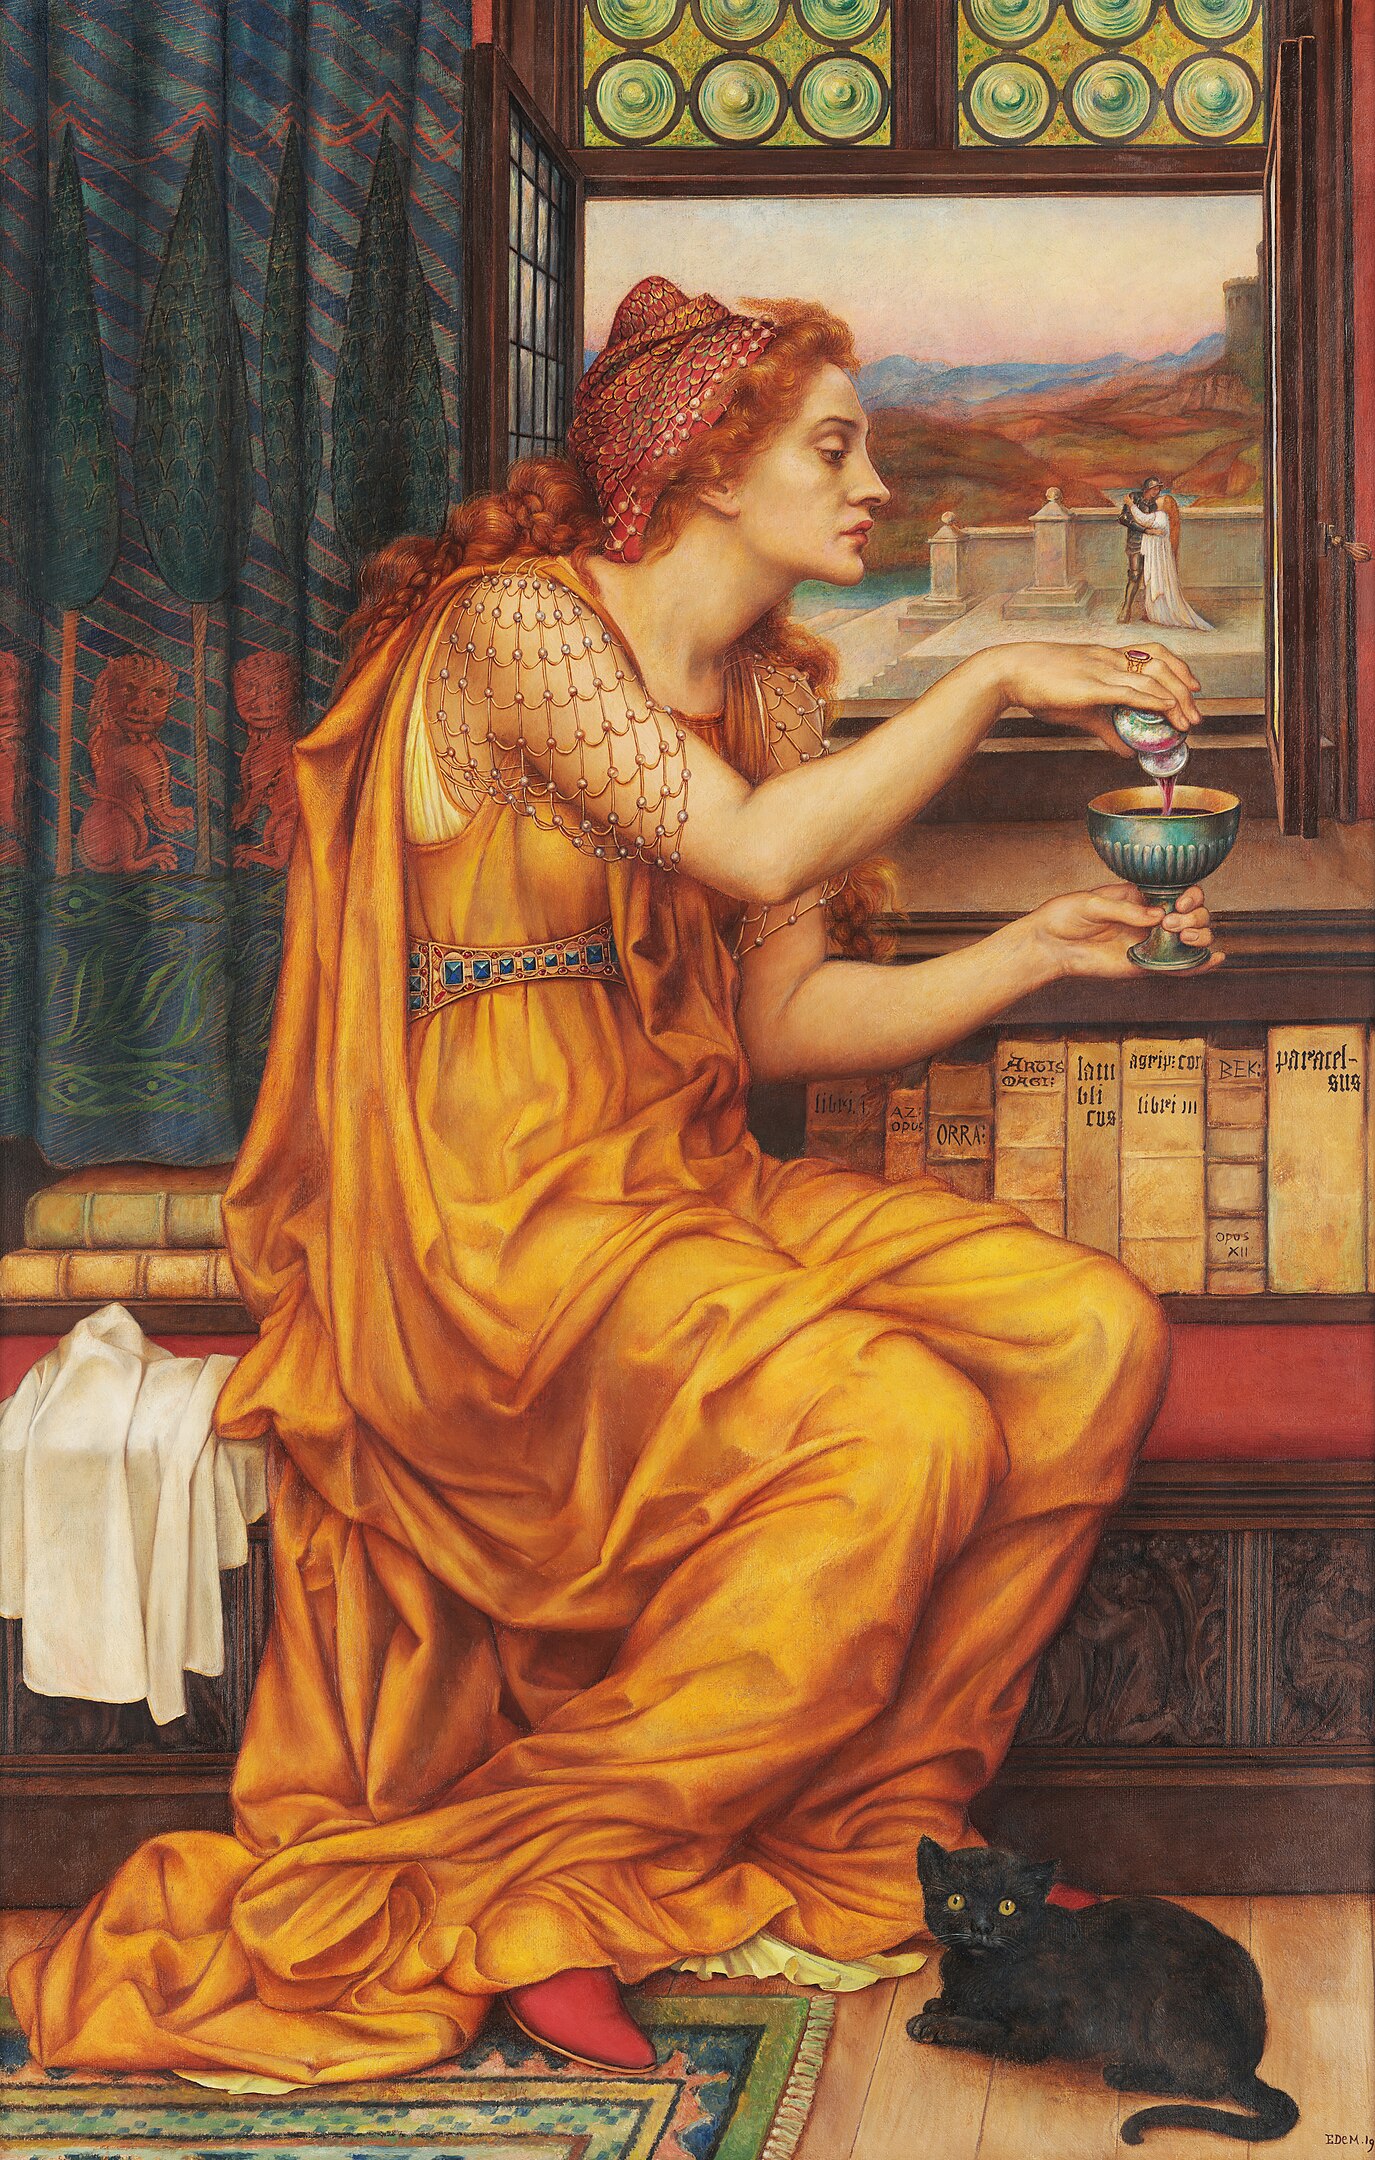 The Love Potion by Evelyn de Morgan - 1903 - 104.1 × 52.1 cm private collection